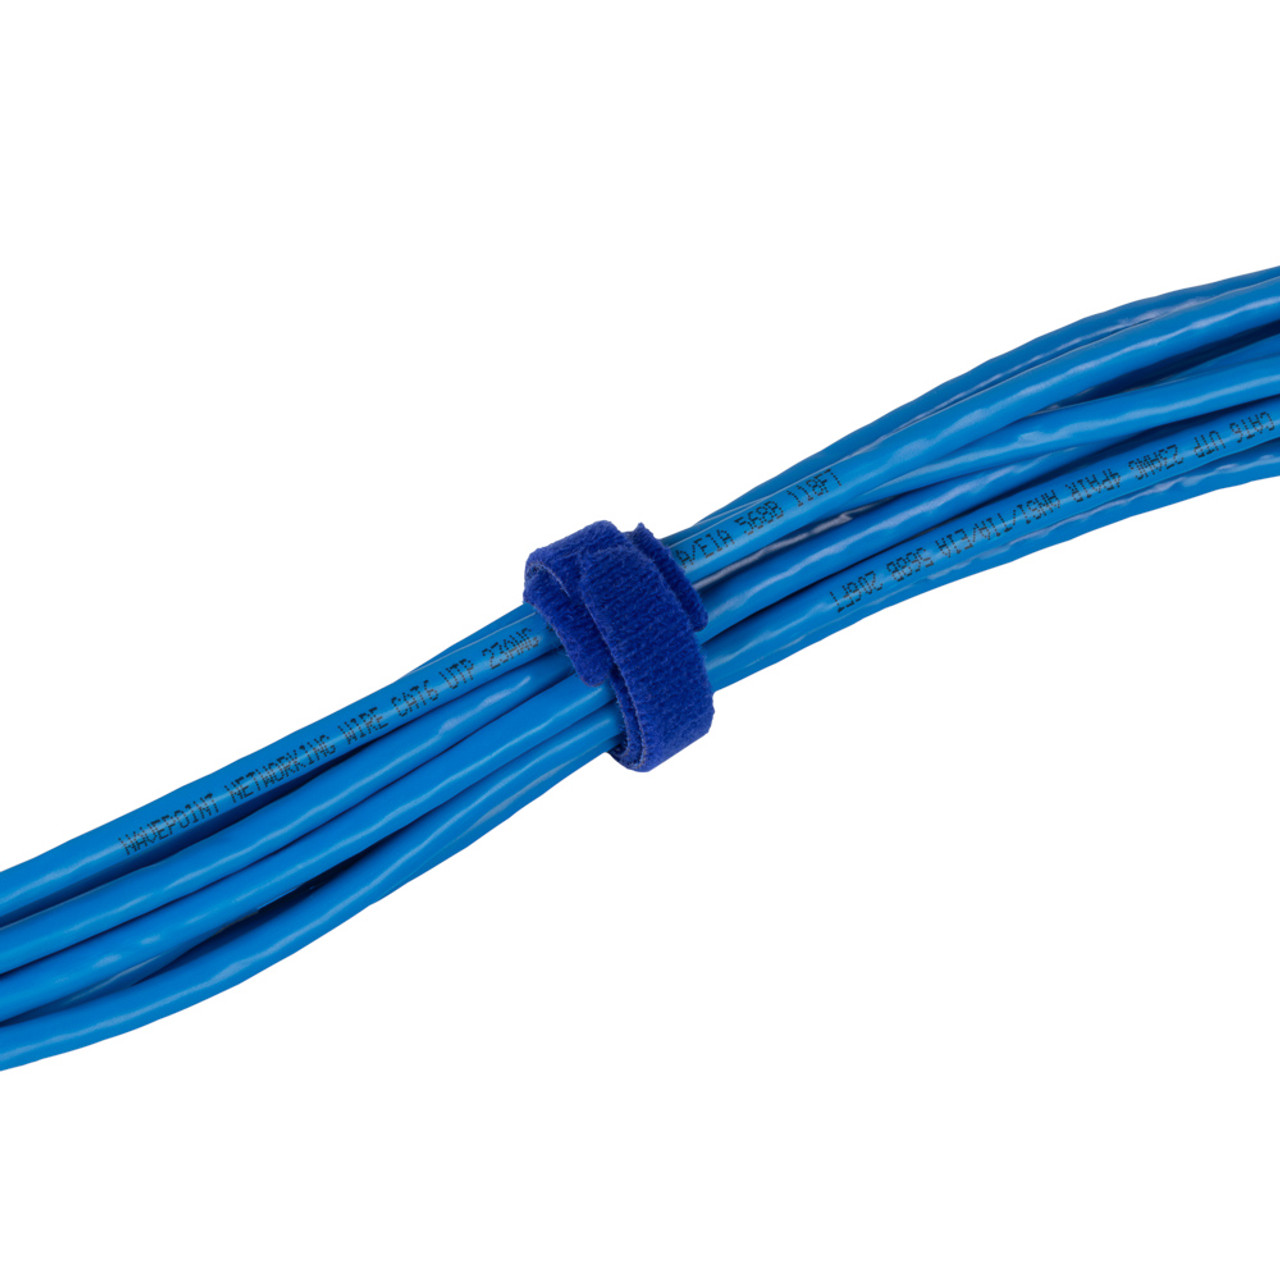 NavePoint 8 Inch Hook and Loop Cable Ties Blue - 25 Pack